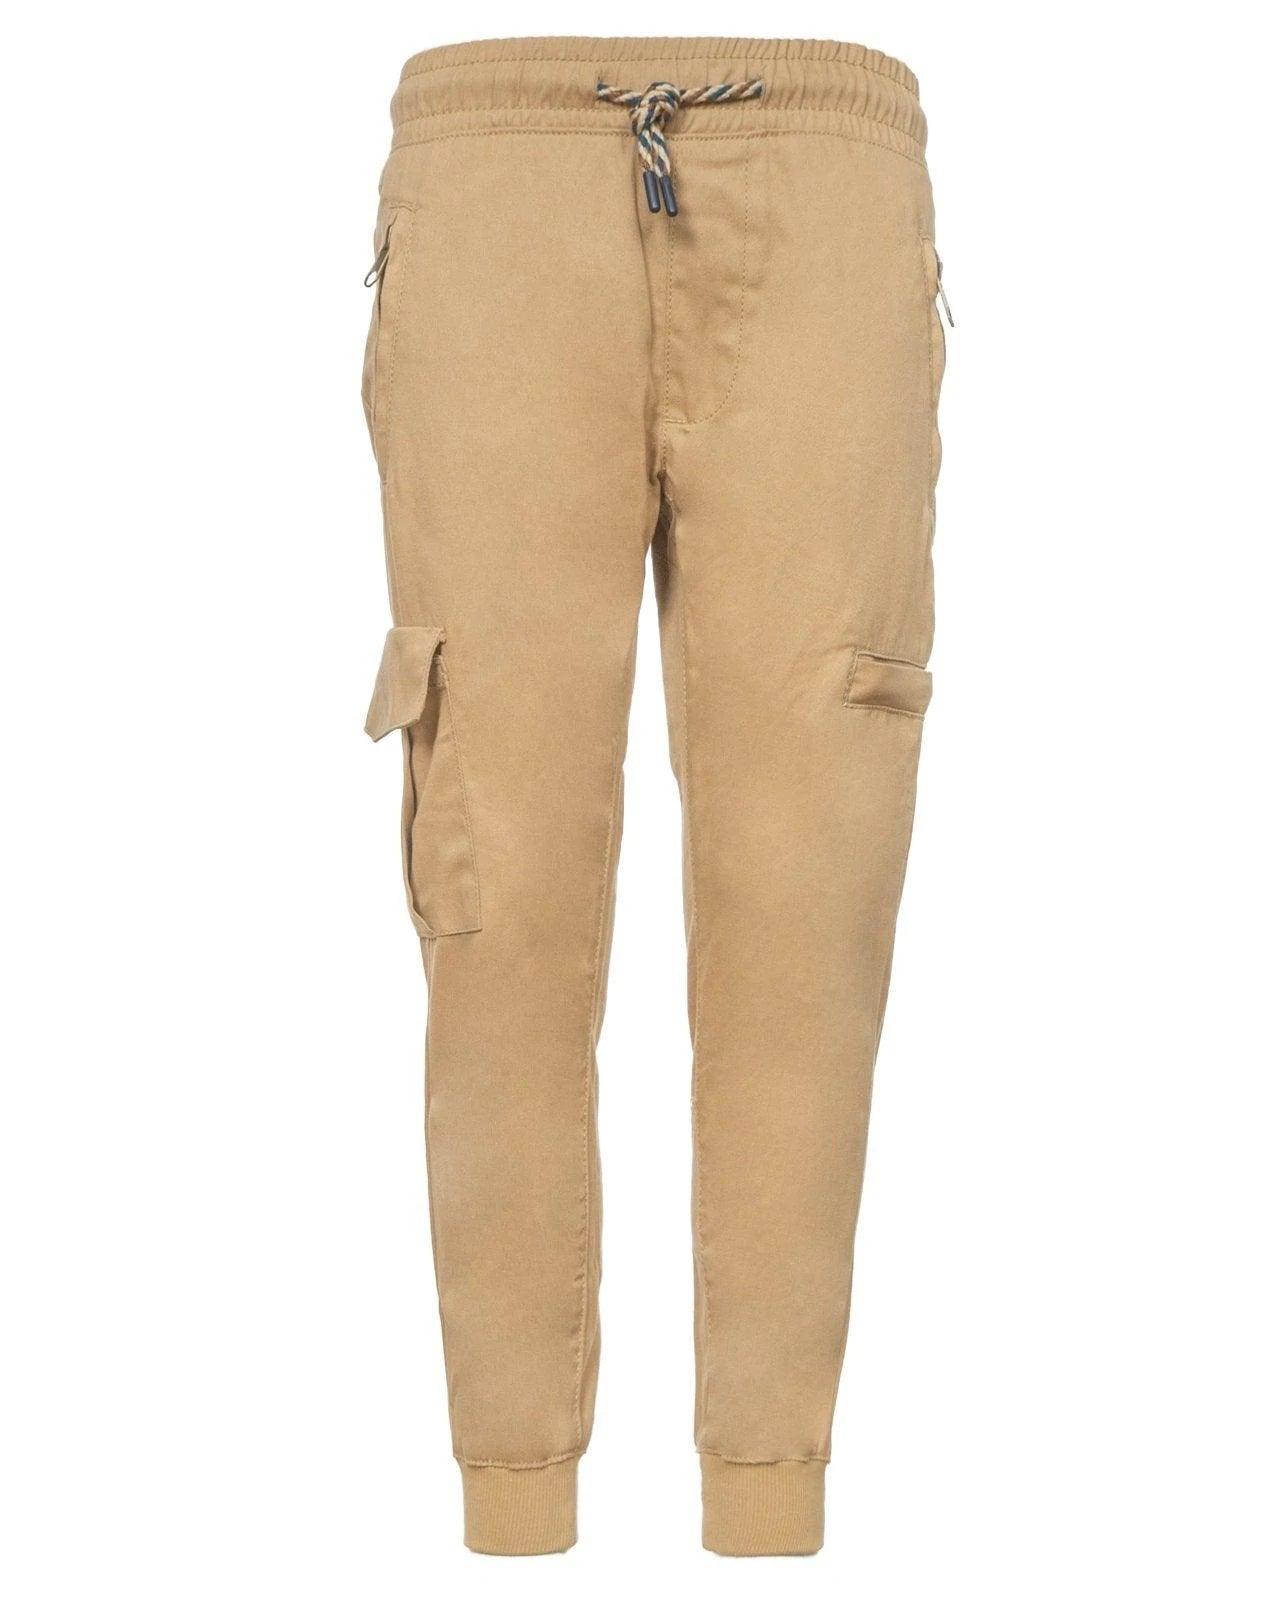 Jake - Boys Washed Cargo Trouser - Brown